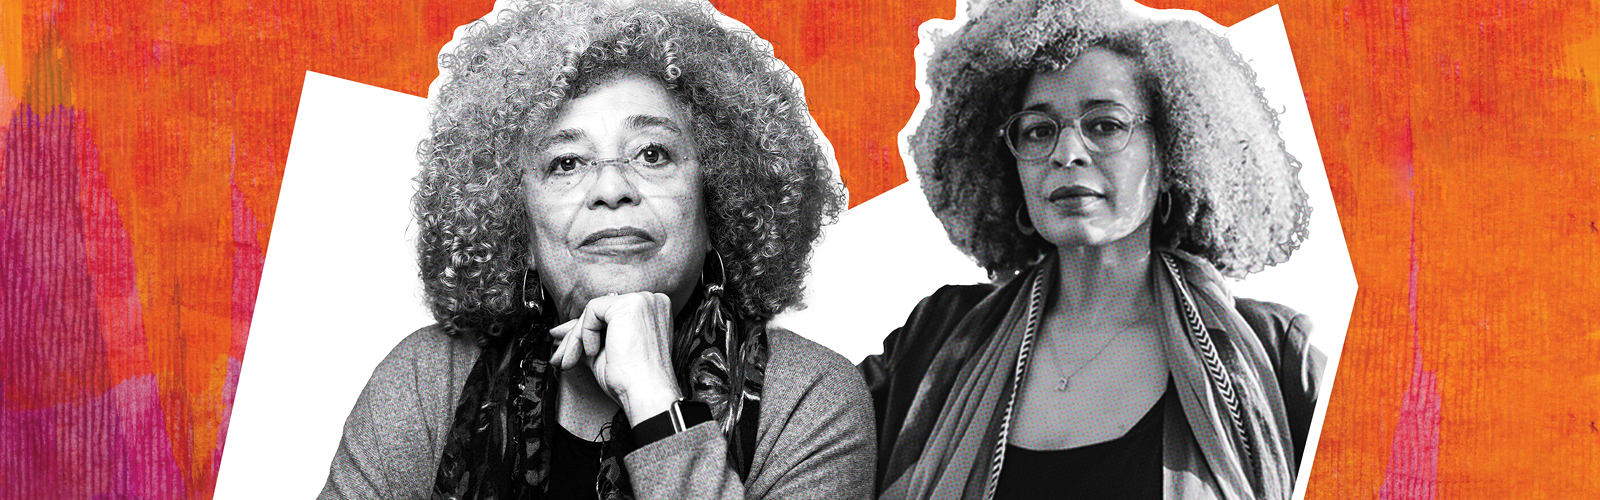 Angela Davis and Gina Dent appear in monochrome photographs atop a colourful hand-painted background texture of oranges, yellows and fuscia.